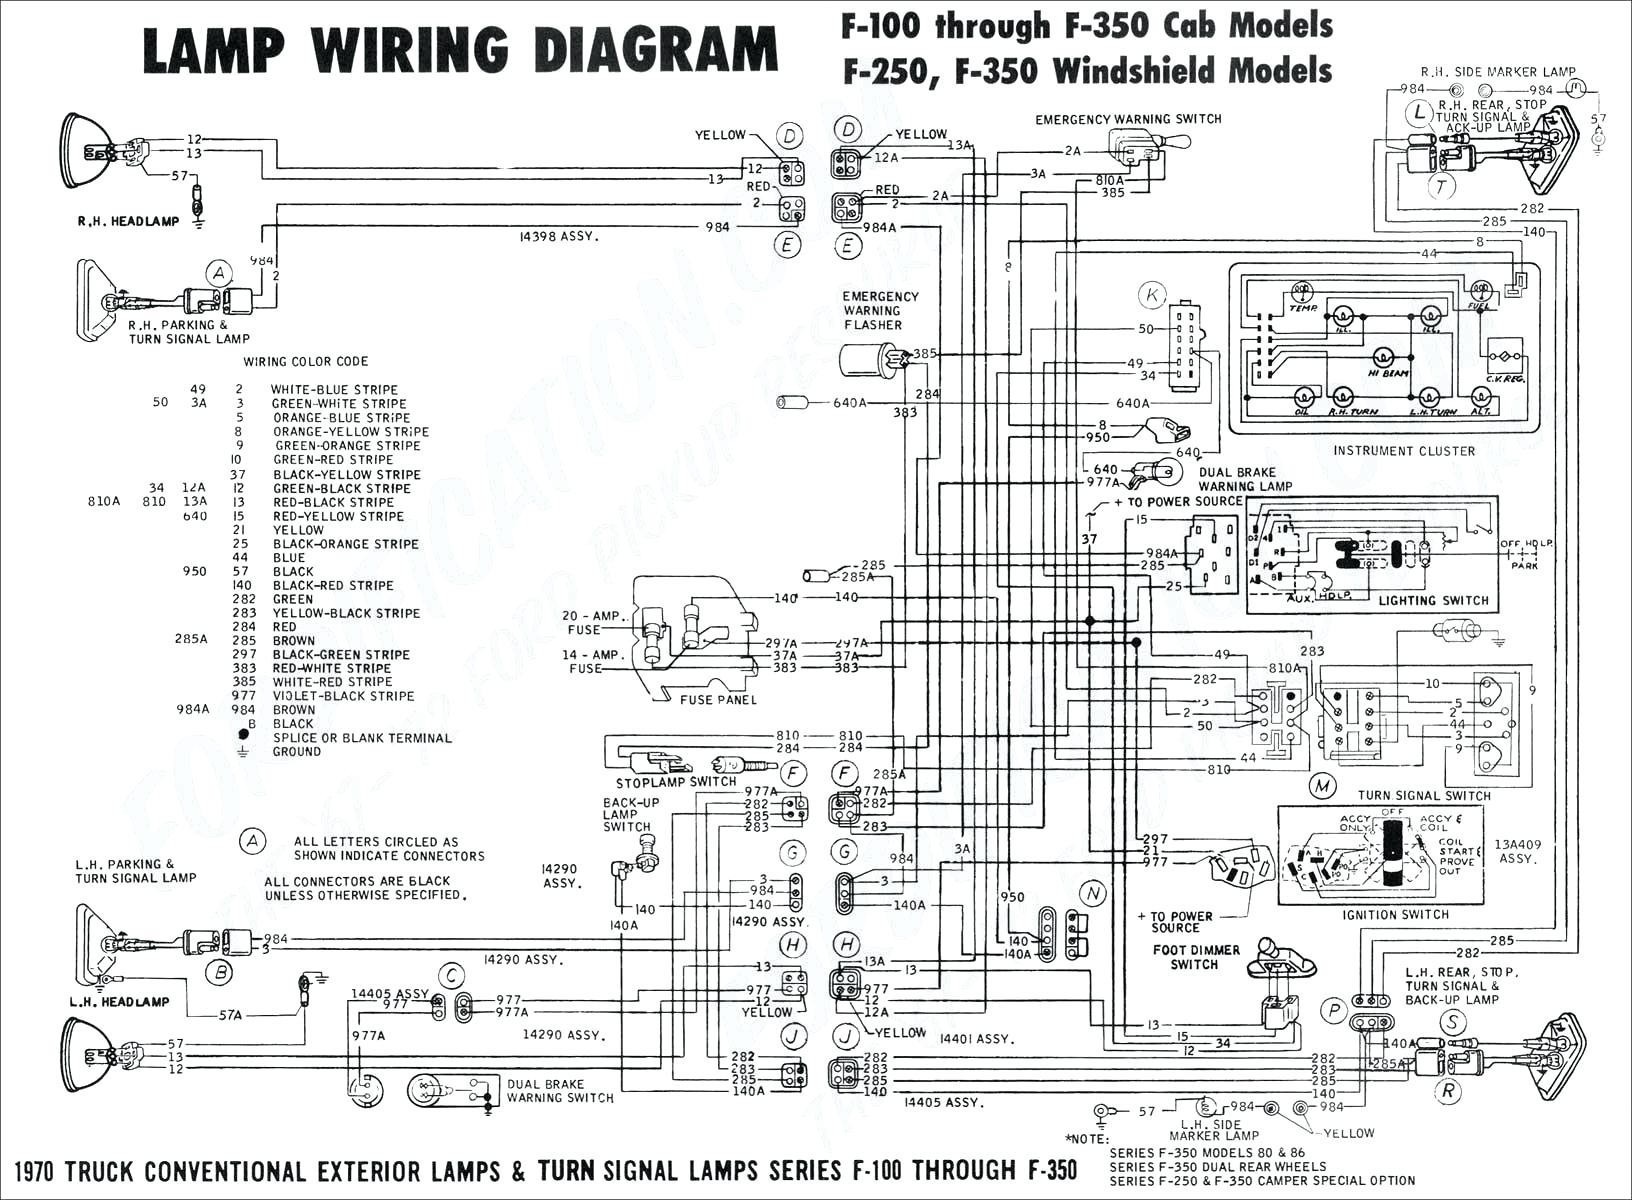 Wiring Diagram for Traffic Lights Simple Wiring Diagrams for Turn Signal Best Stop Turn Tail Light Wiring